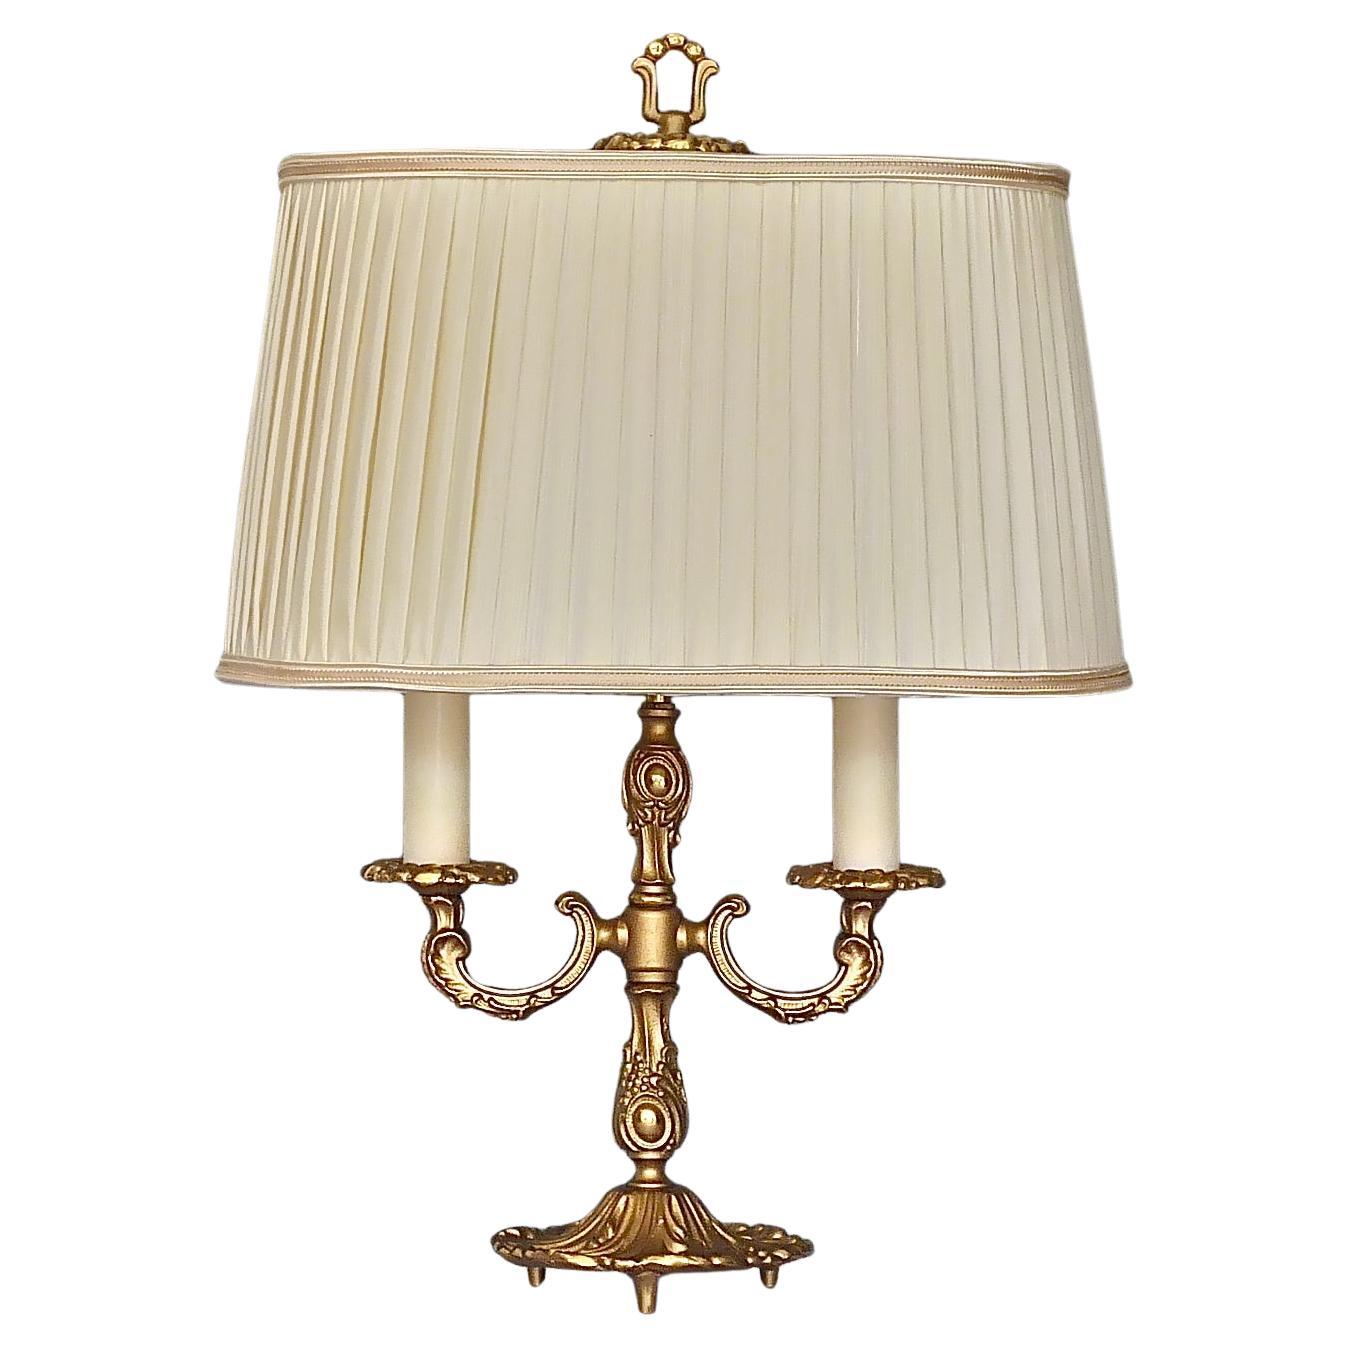 Baroque Maison Jansen Style Midcentury Table Lamp Brass Leaf Decor Germany 1950s For Sale